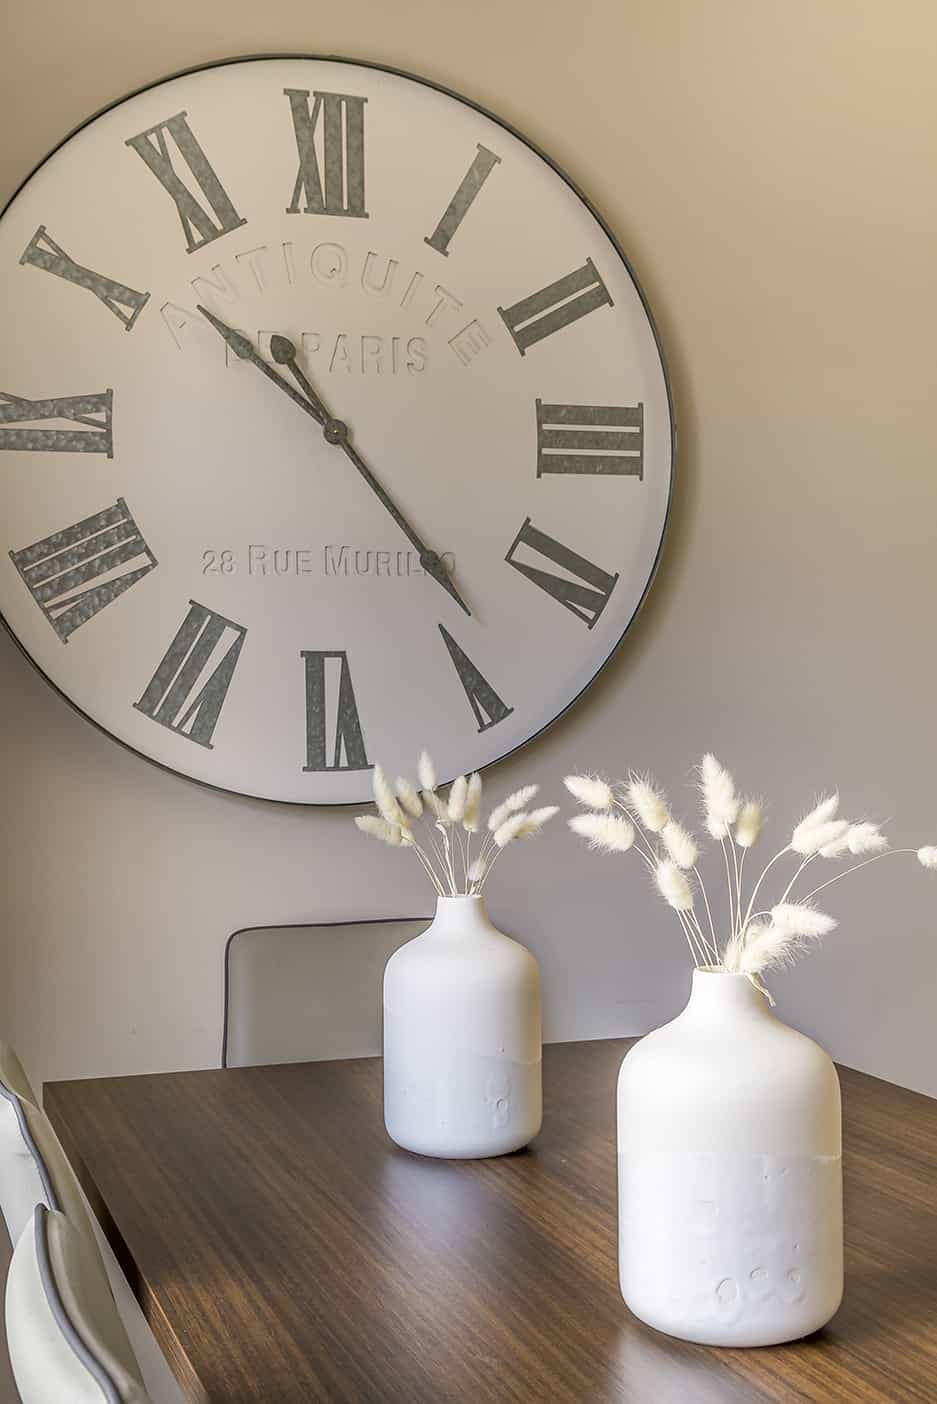 Our interior designers in Potters Bar provided this vintage-inspired wall clock.